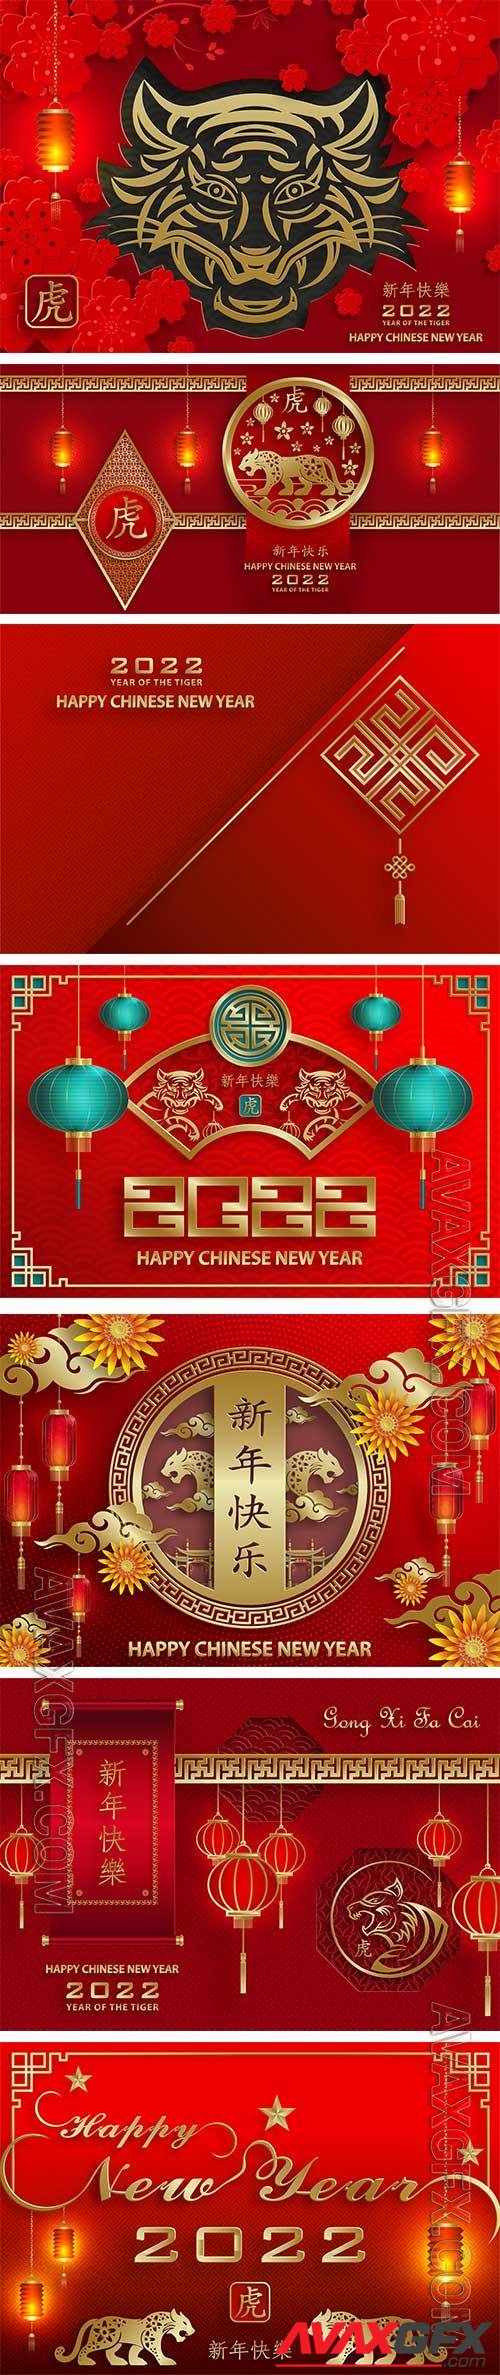 Happy chinese new year 2022, tiger zodiac vector sign